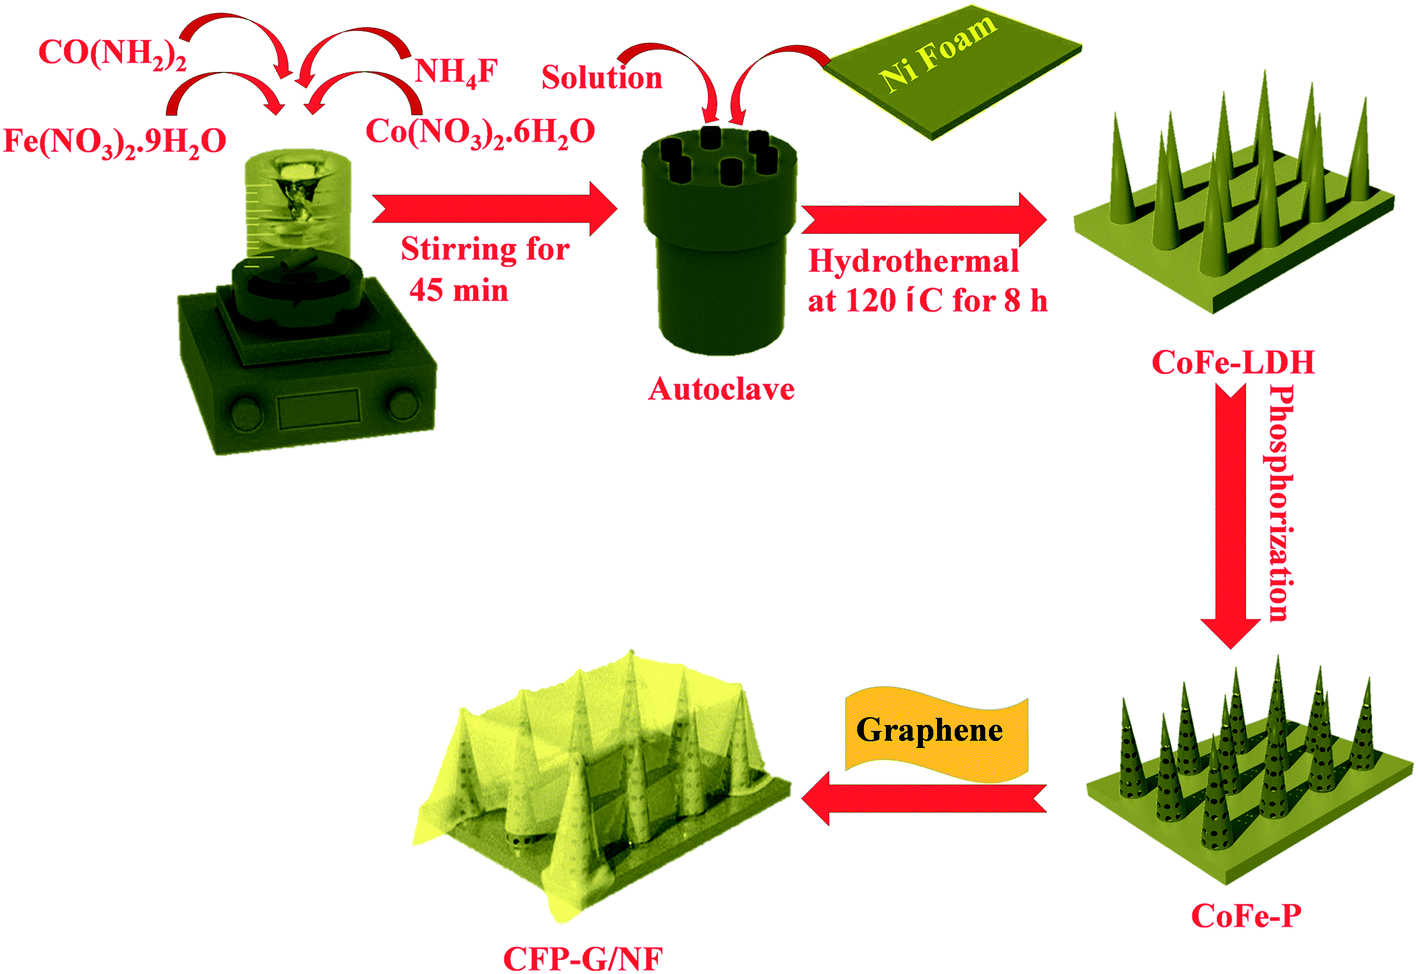 Formation Of Graphene Encapsulated Cobalt Iron Phosphide Nanoneedles As An Attractive Electrocatalyst For Overall Water Splitting Catalysis Science Technology Rsc Publishing Doi 10 1039 D0cya